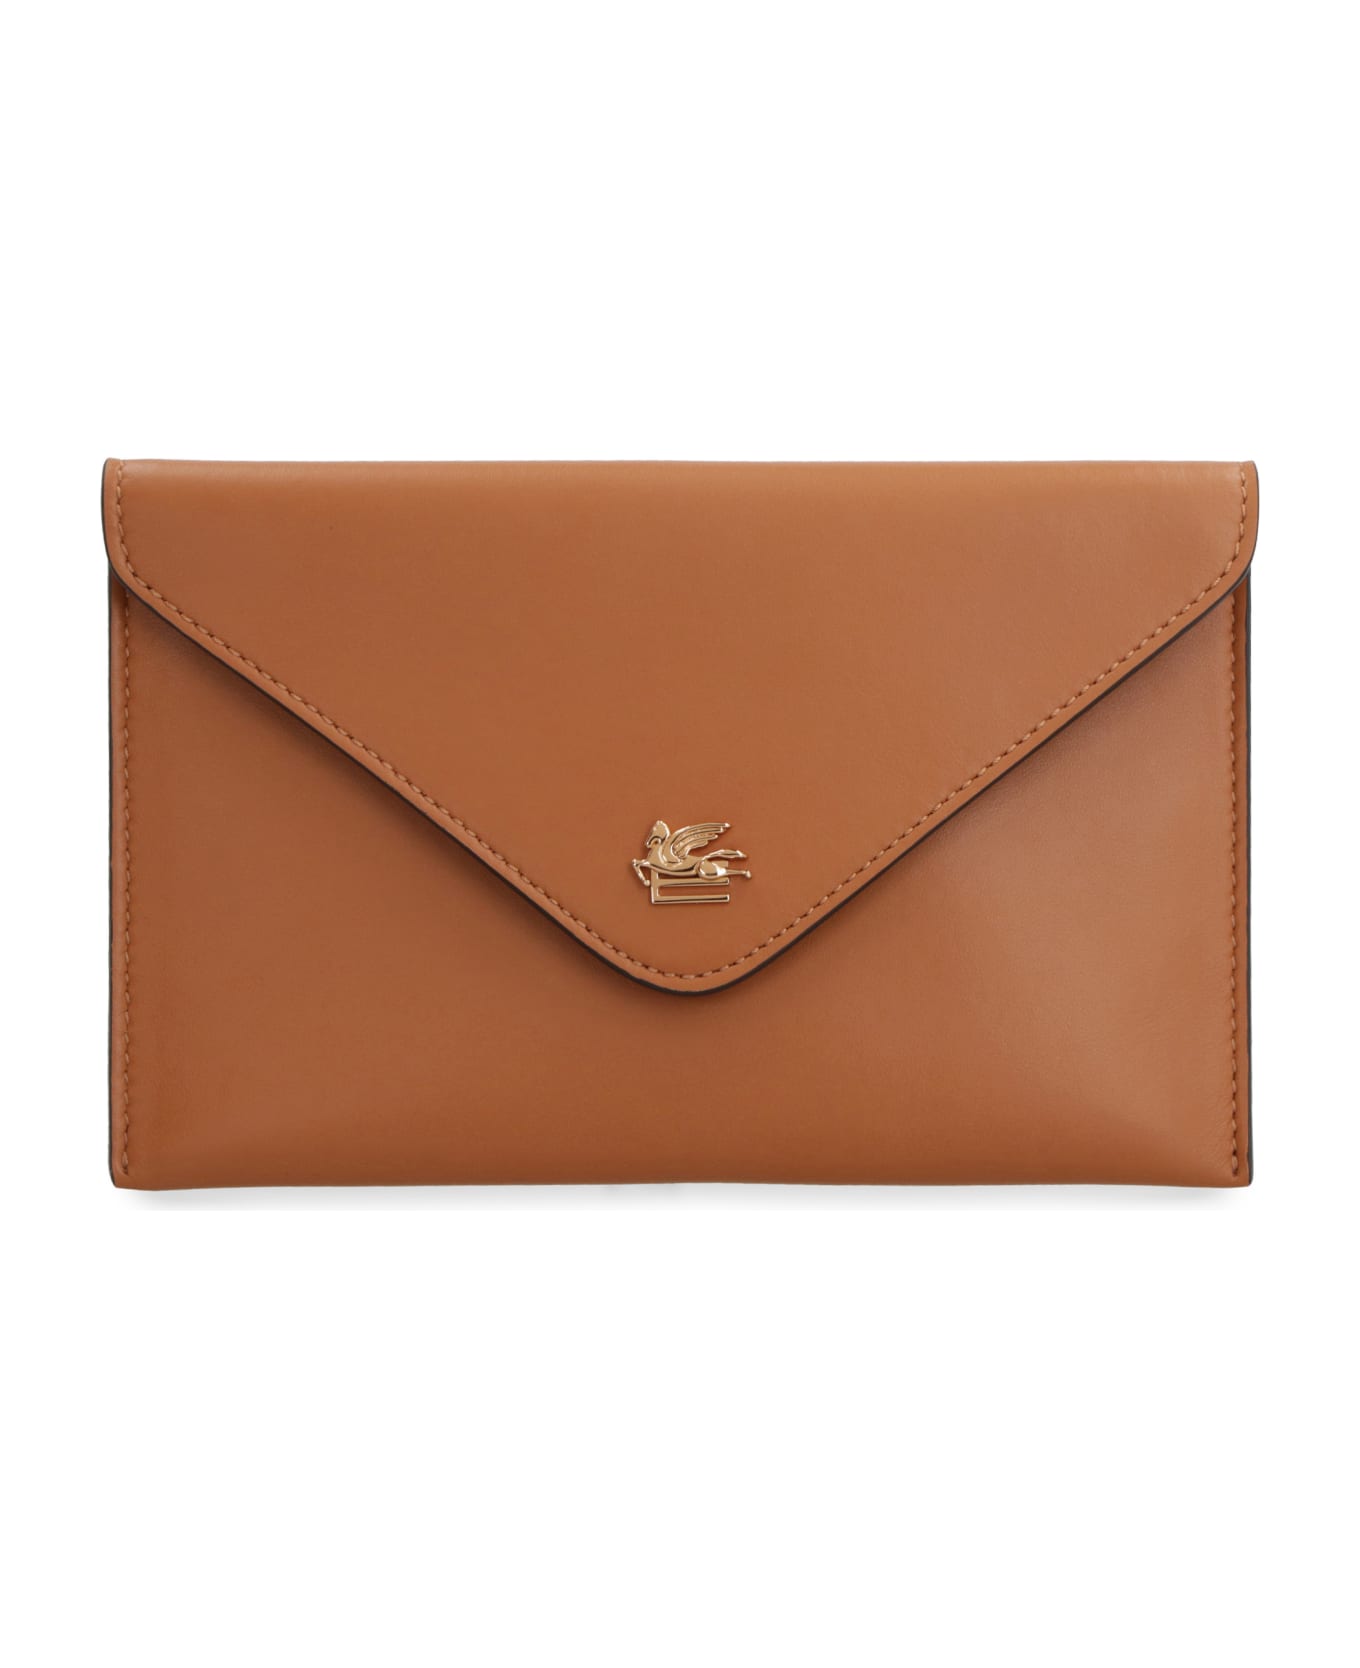 Etro Leather Flat Pouch - Saddle Brown